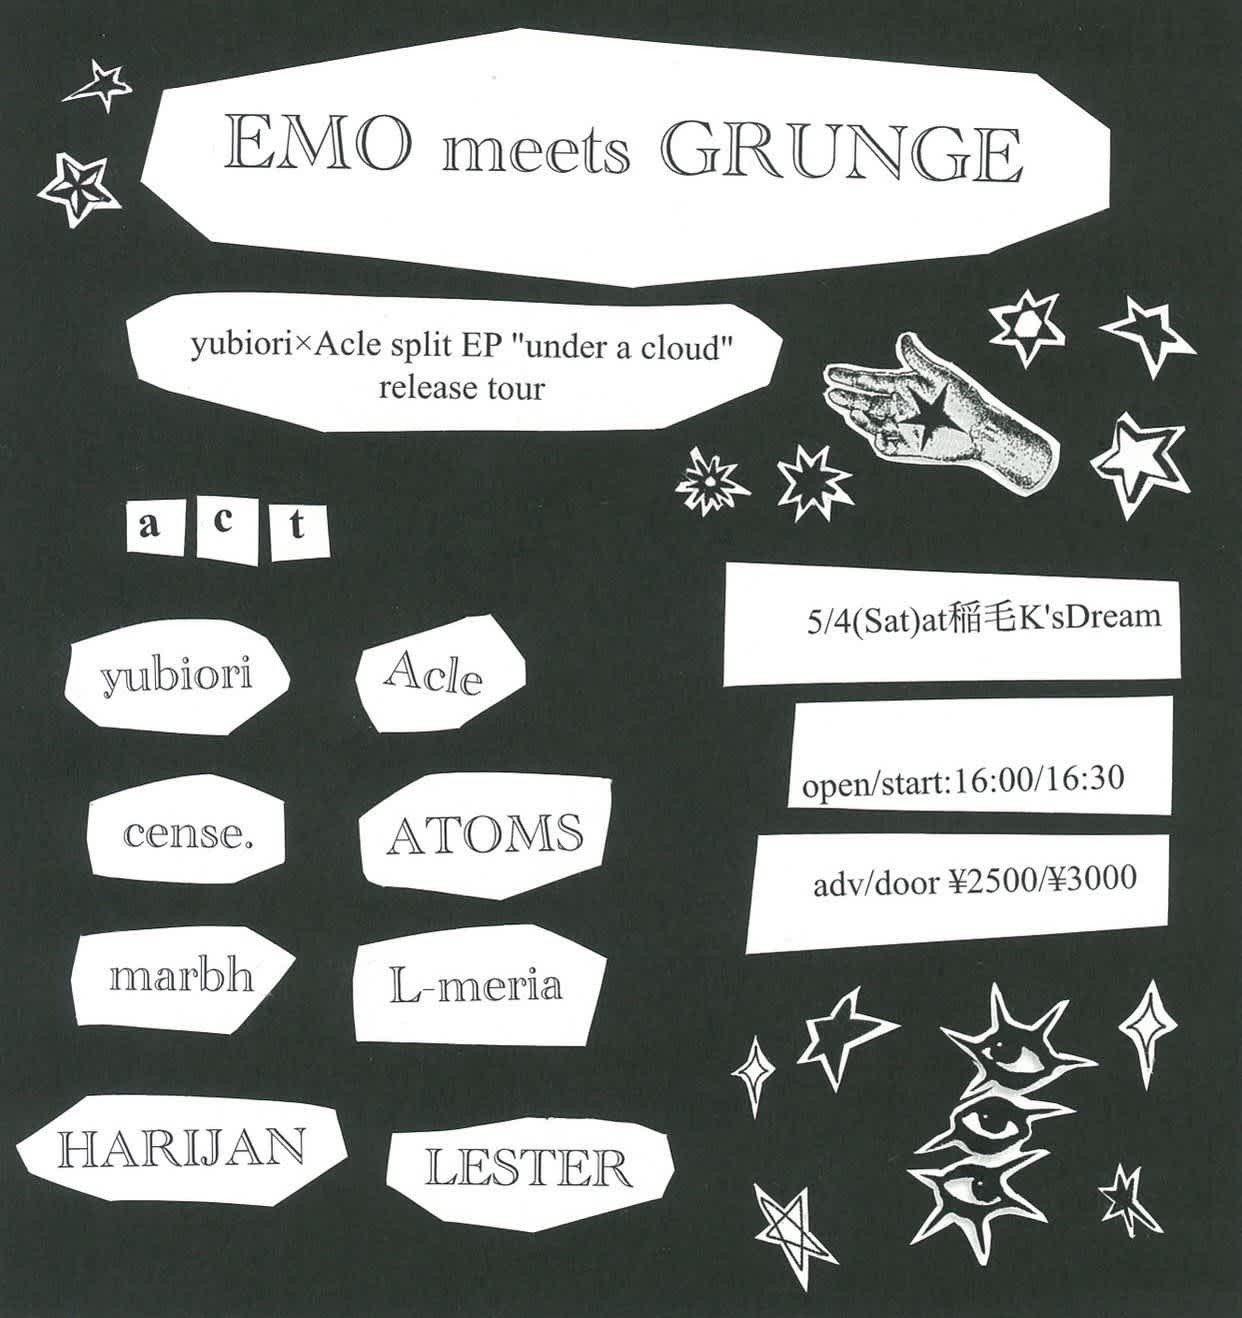 " EMO meets GRUNGE " yubiori×Acle split EP "under a cloud"  release tour in Inageのイメージ1